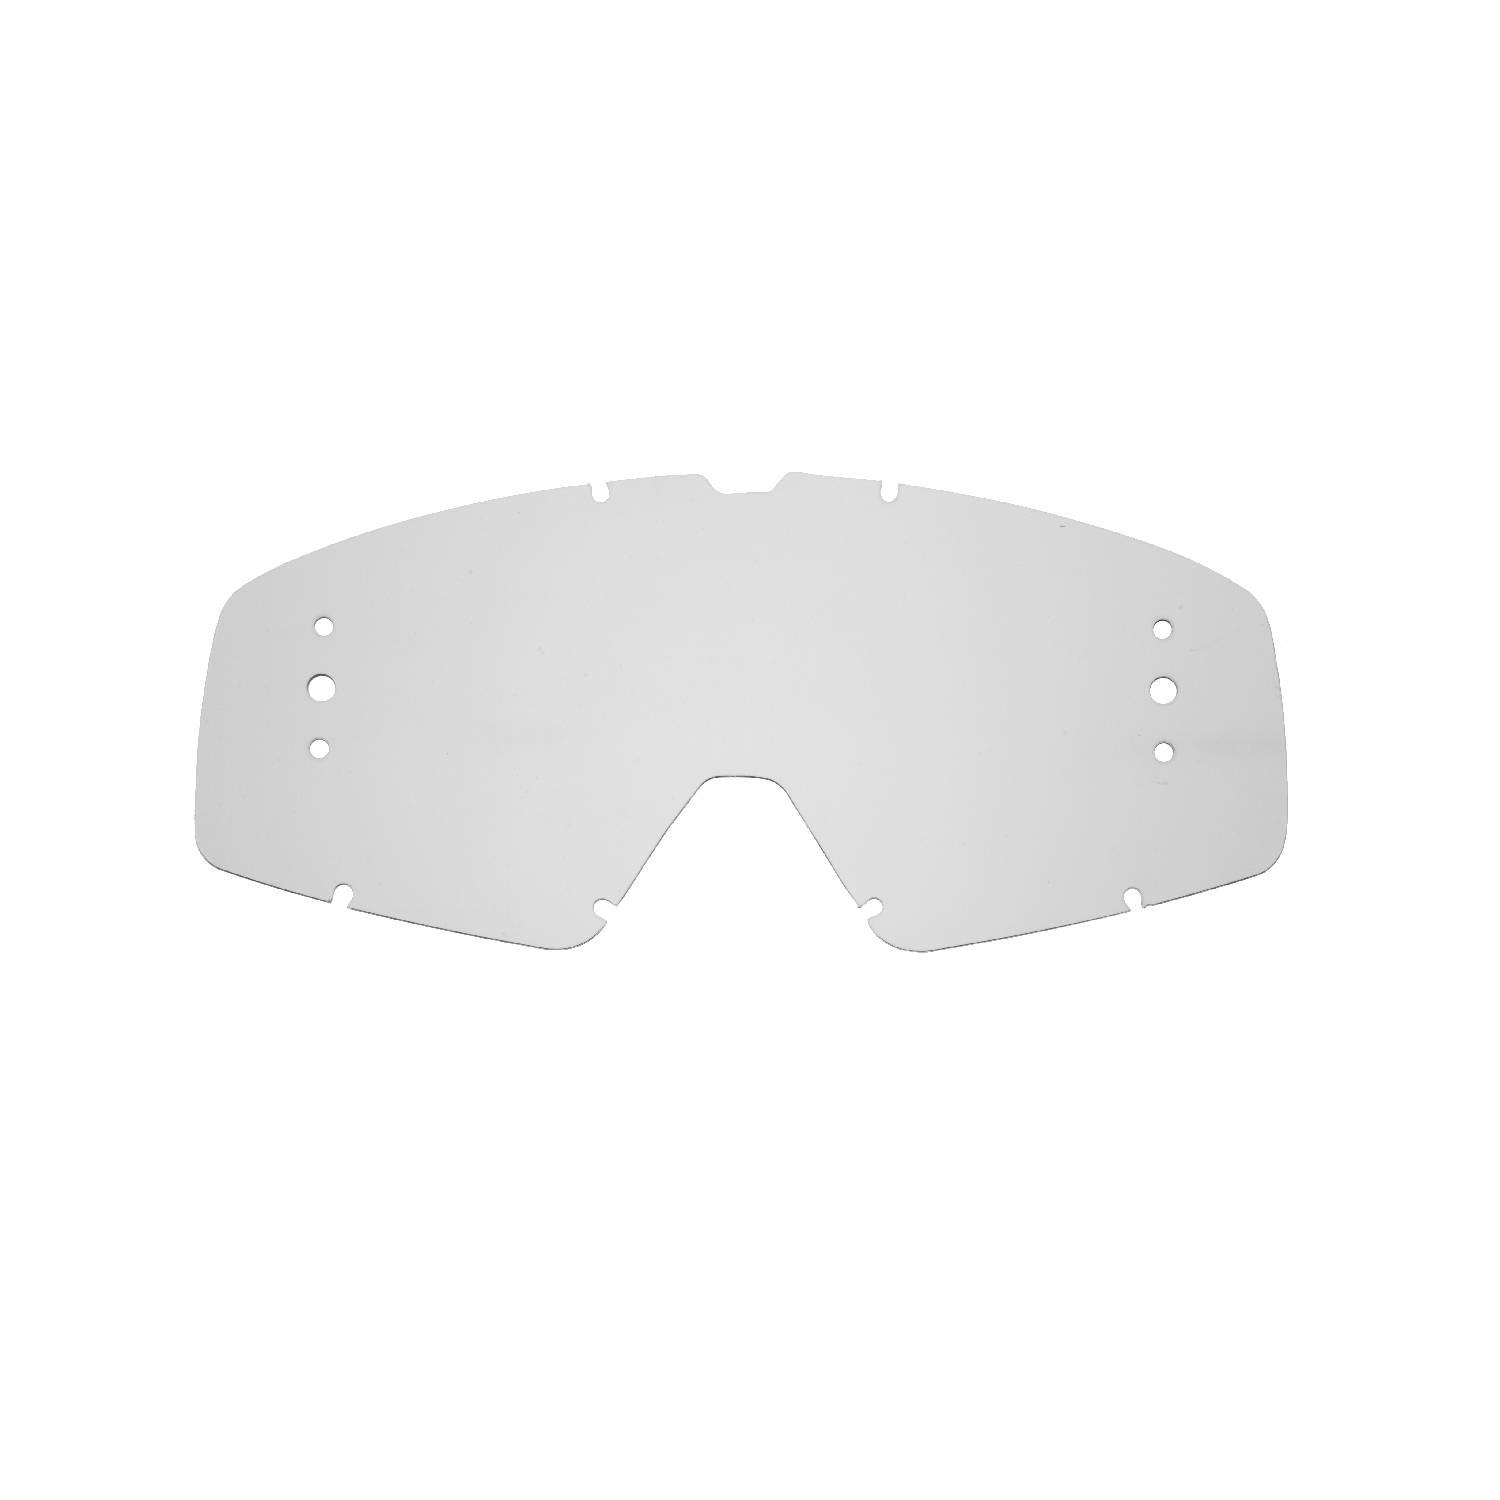 Seecle FOX SE-41Z005-HZ roll off lenses with clear lenses compatible for Main Encore / Main Pro Mx goggle